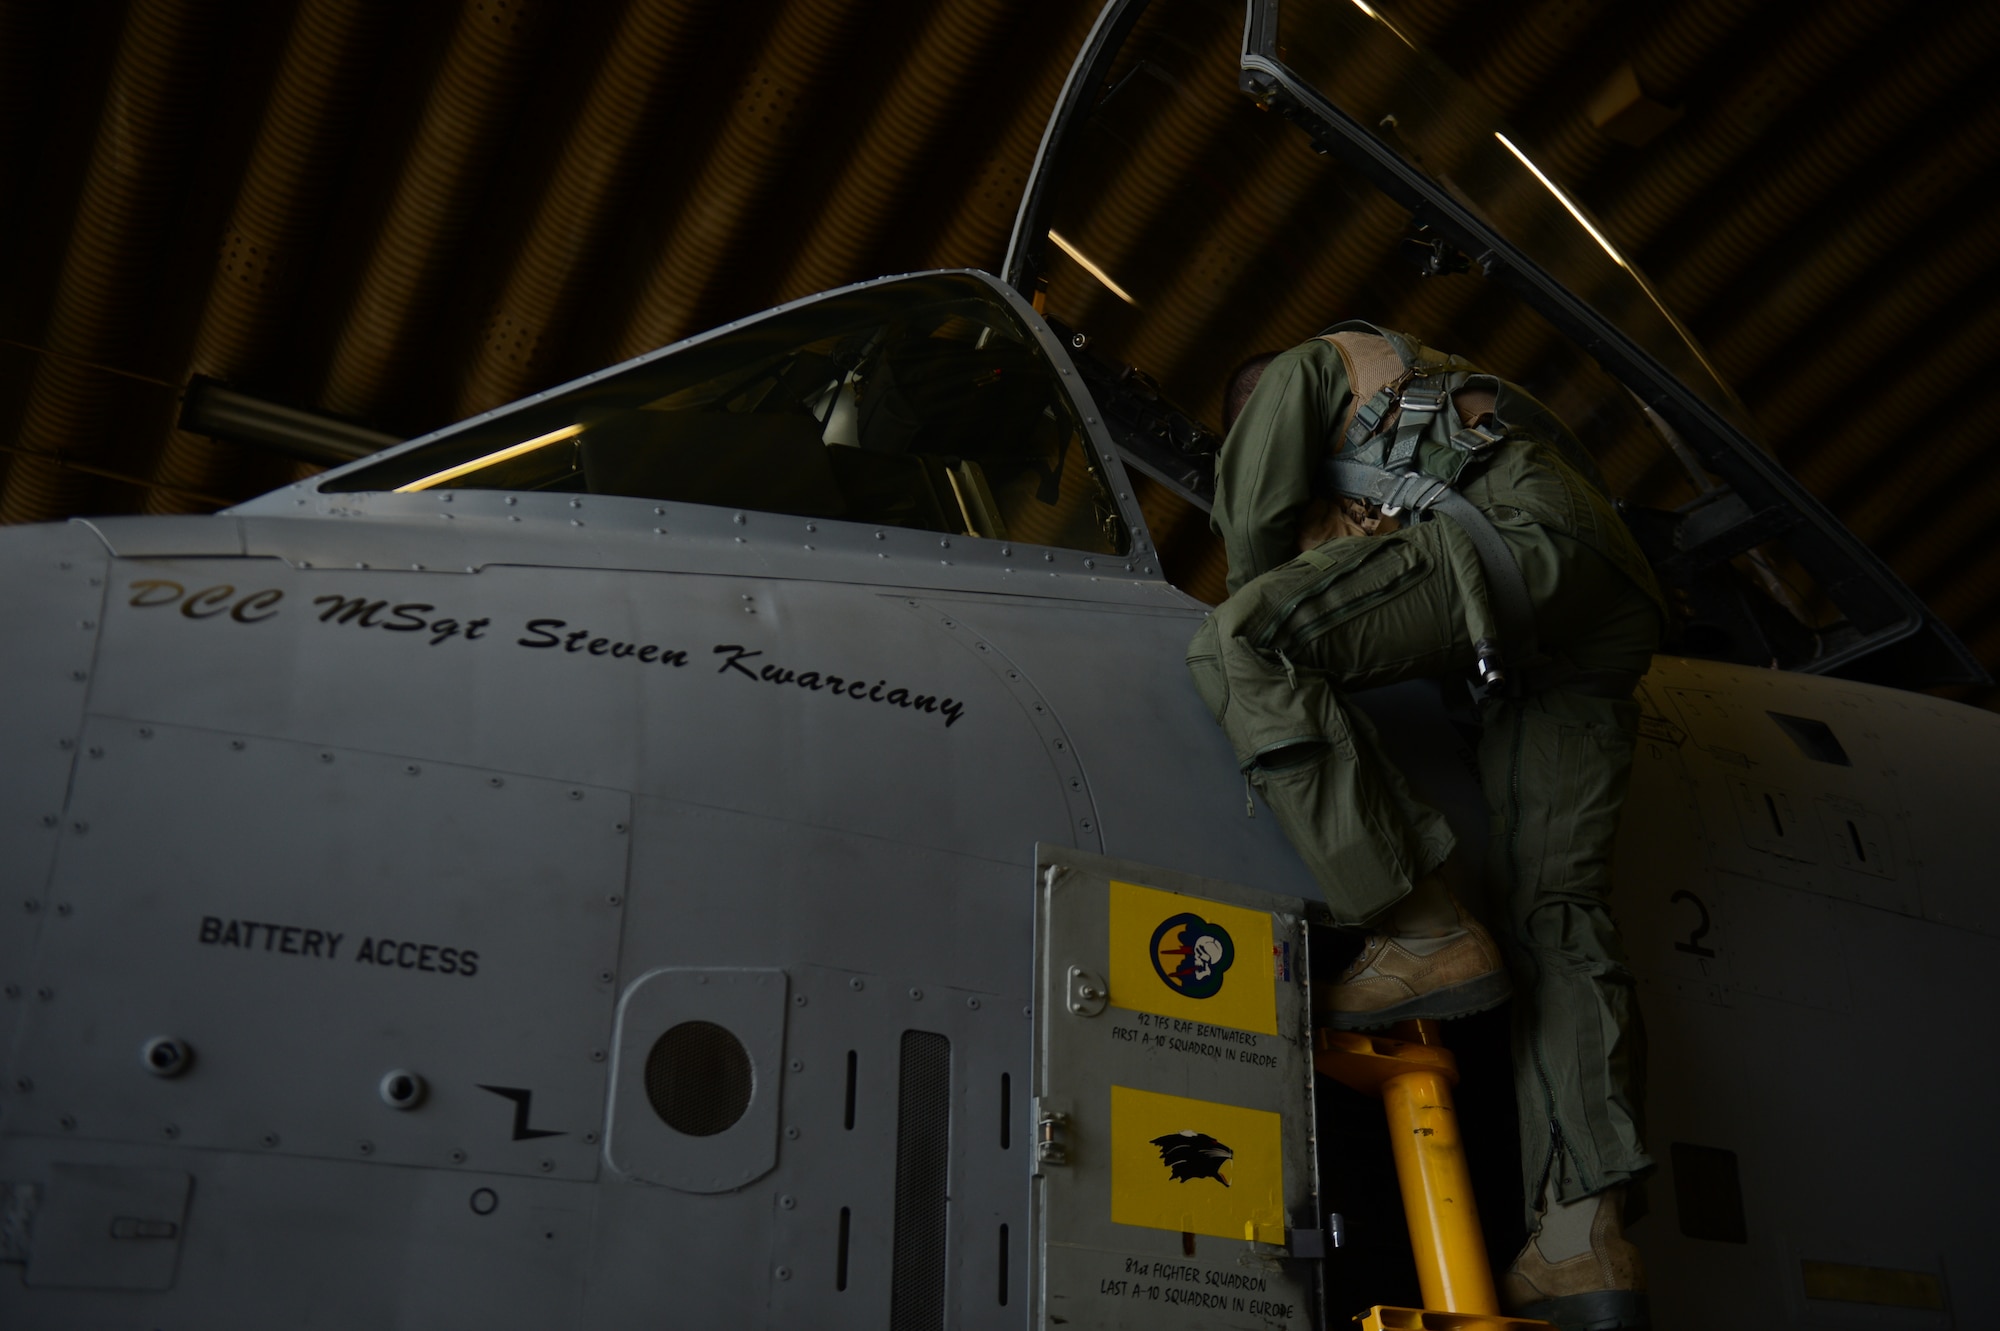 SPANGDAHLEM AIR BASE, Germany – U.S. Air Force Lt. Col. Clinton Eichelberger, 81st Fighter Squadron commander, inspects the cockpit of an U.S. Air Force A-10 Thunderbolt II attack aircraft before departing May 17, 2013. Eichelberger flew one of the final four A-10 aircraft flight to leave Europe at Spangdahlem Air Base. (U.S. Air Force photo by Airman 1st Class Gustavo Castillo/Released)